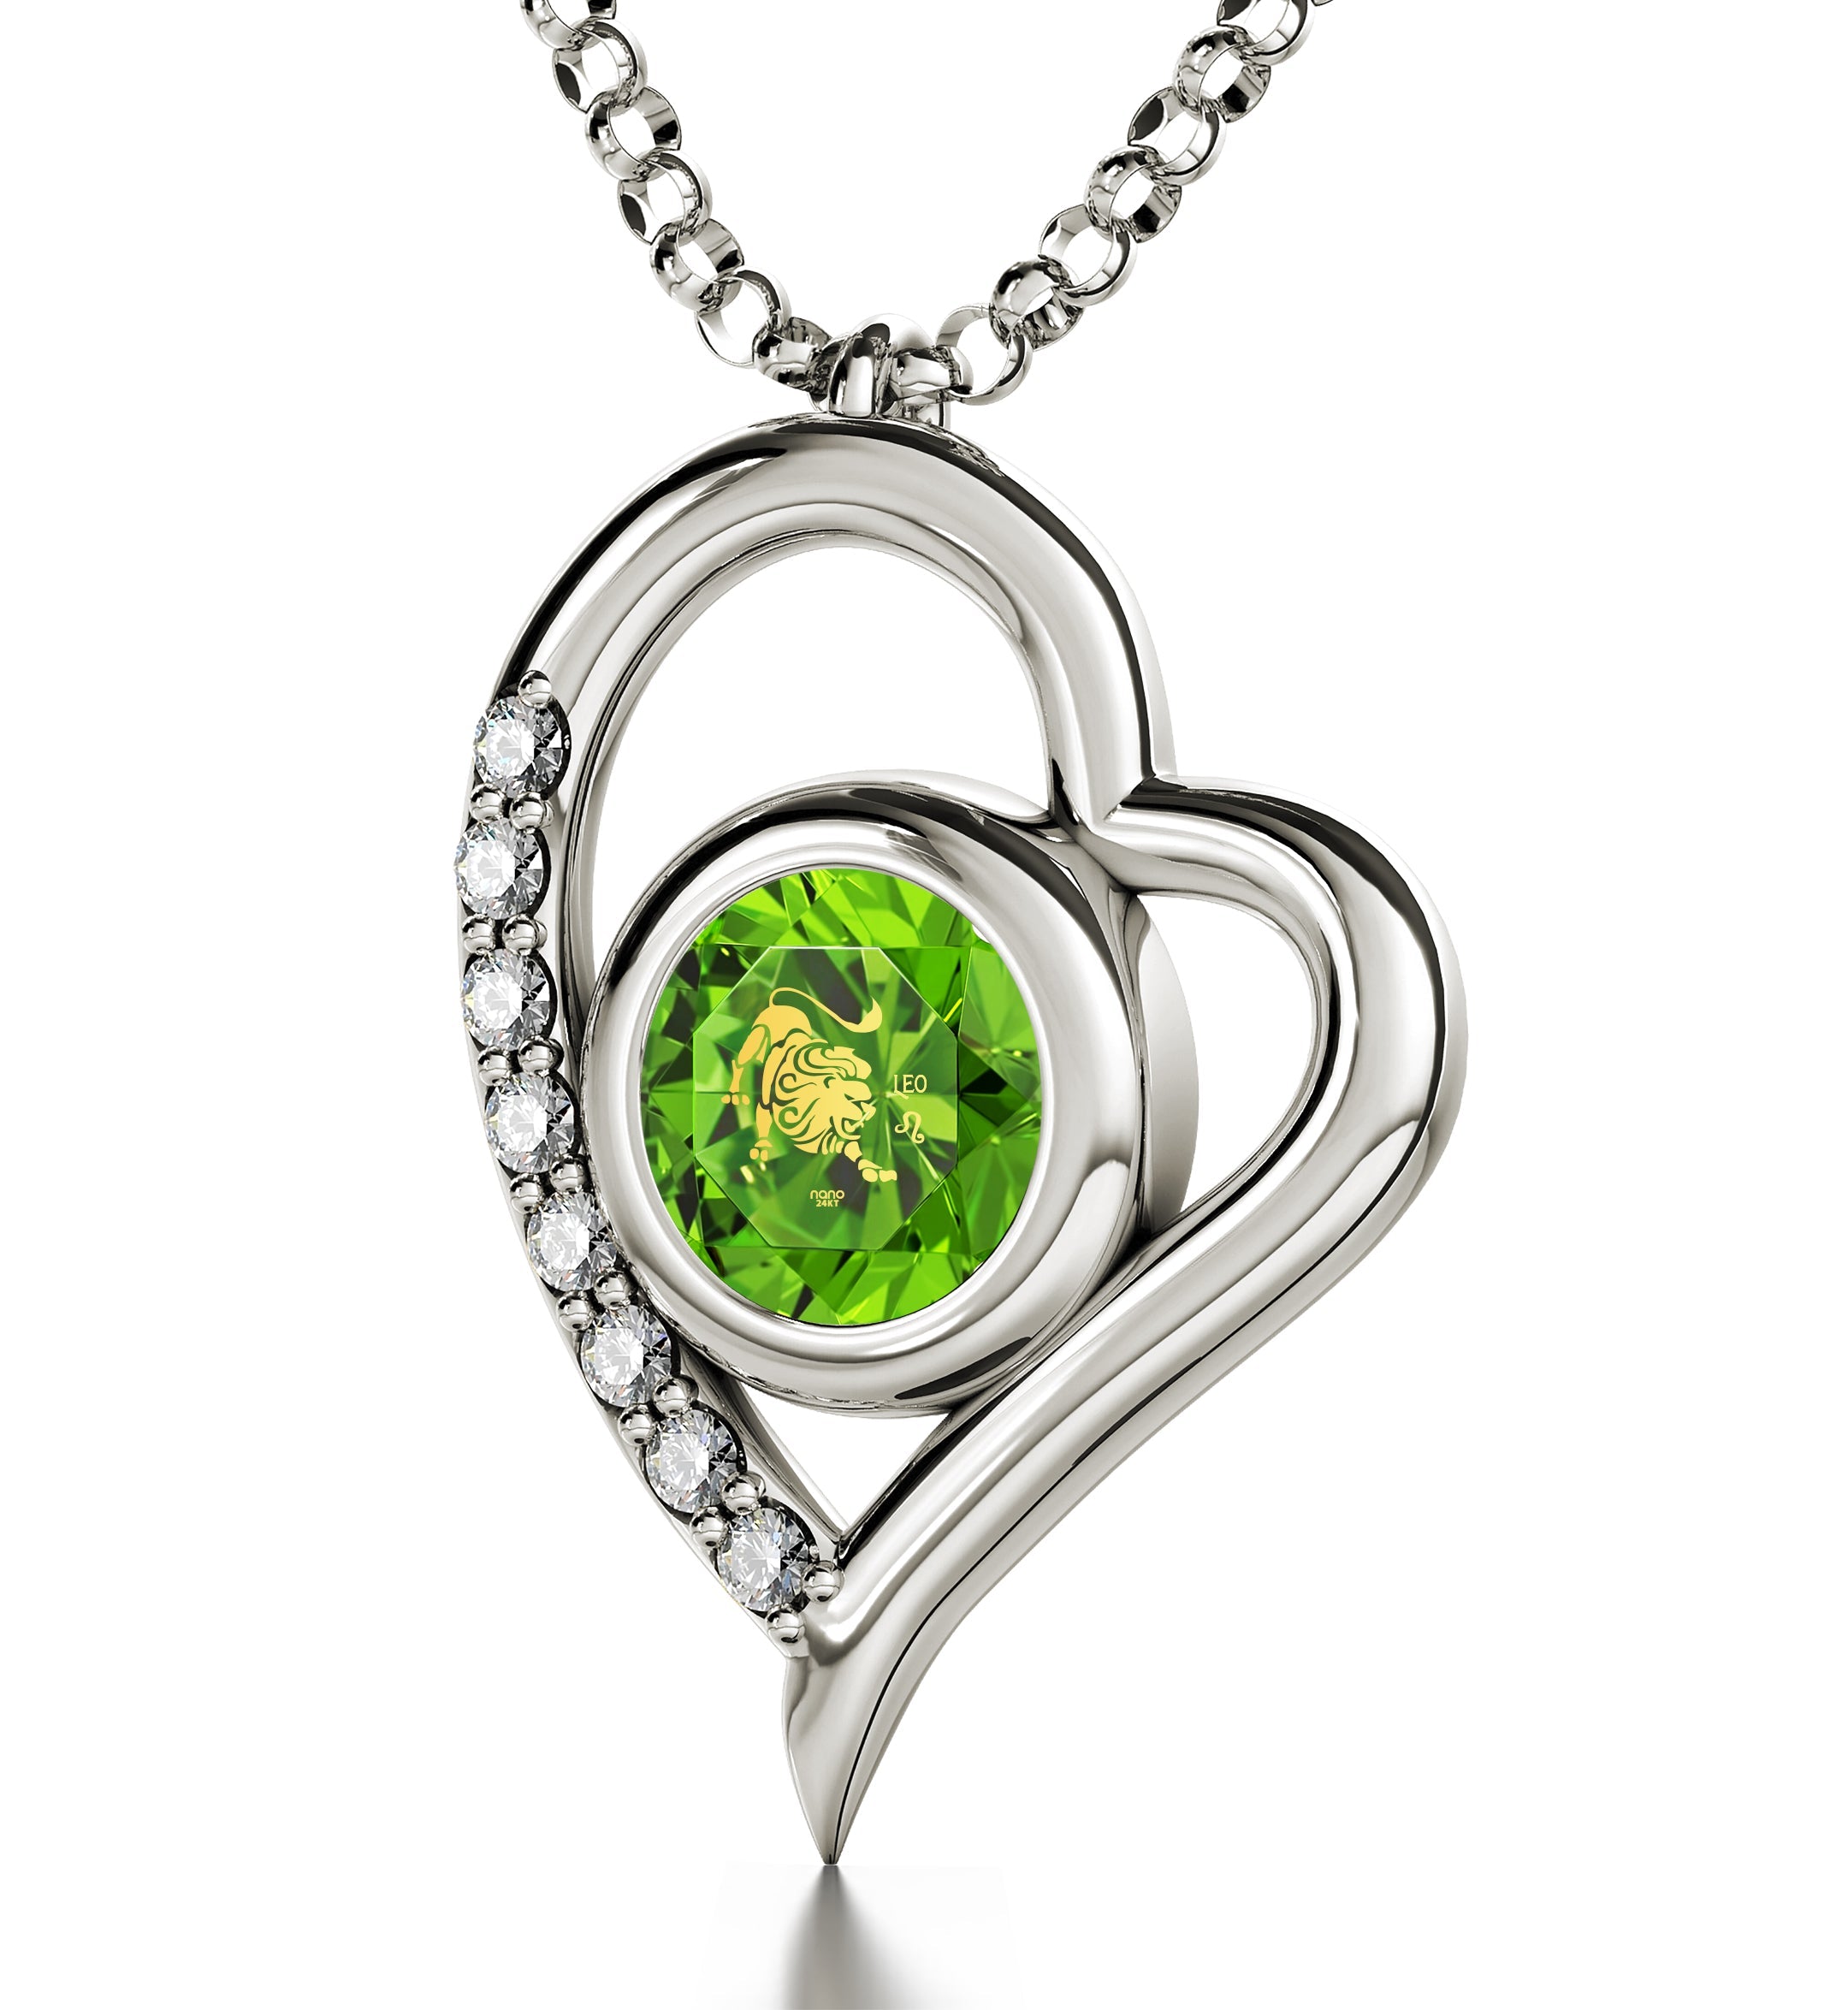 925 Sterling Silver Leo Necklace Zodiac Heart Pendant 24k Gold Inscribed on Crystal heart-shaped pendant necklace with "Leo" sign, adorned with Swarovski crystals, featuring a green inset and a tag labeled "nano jewelry.